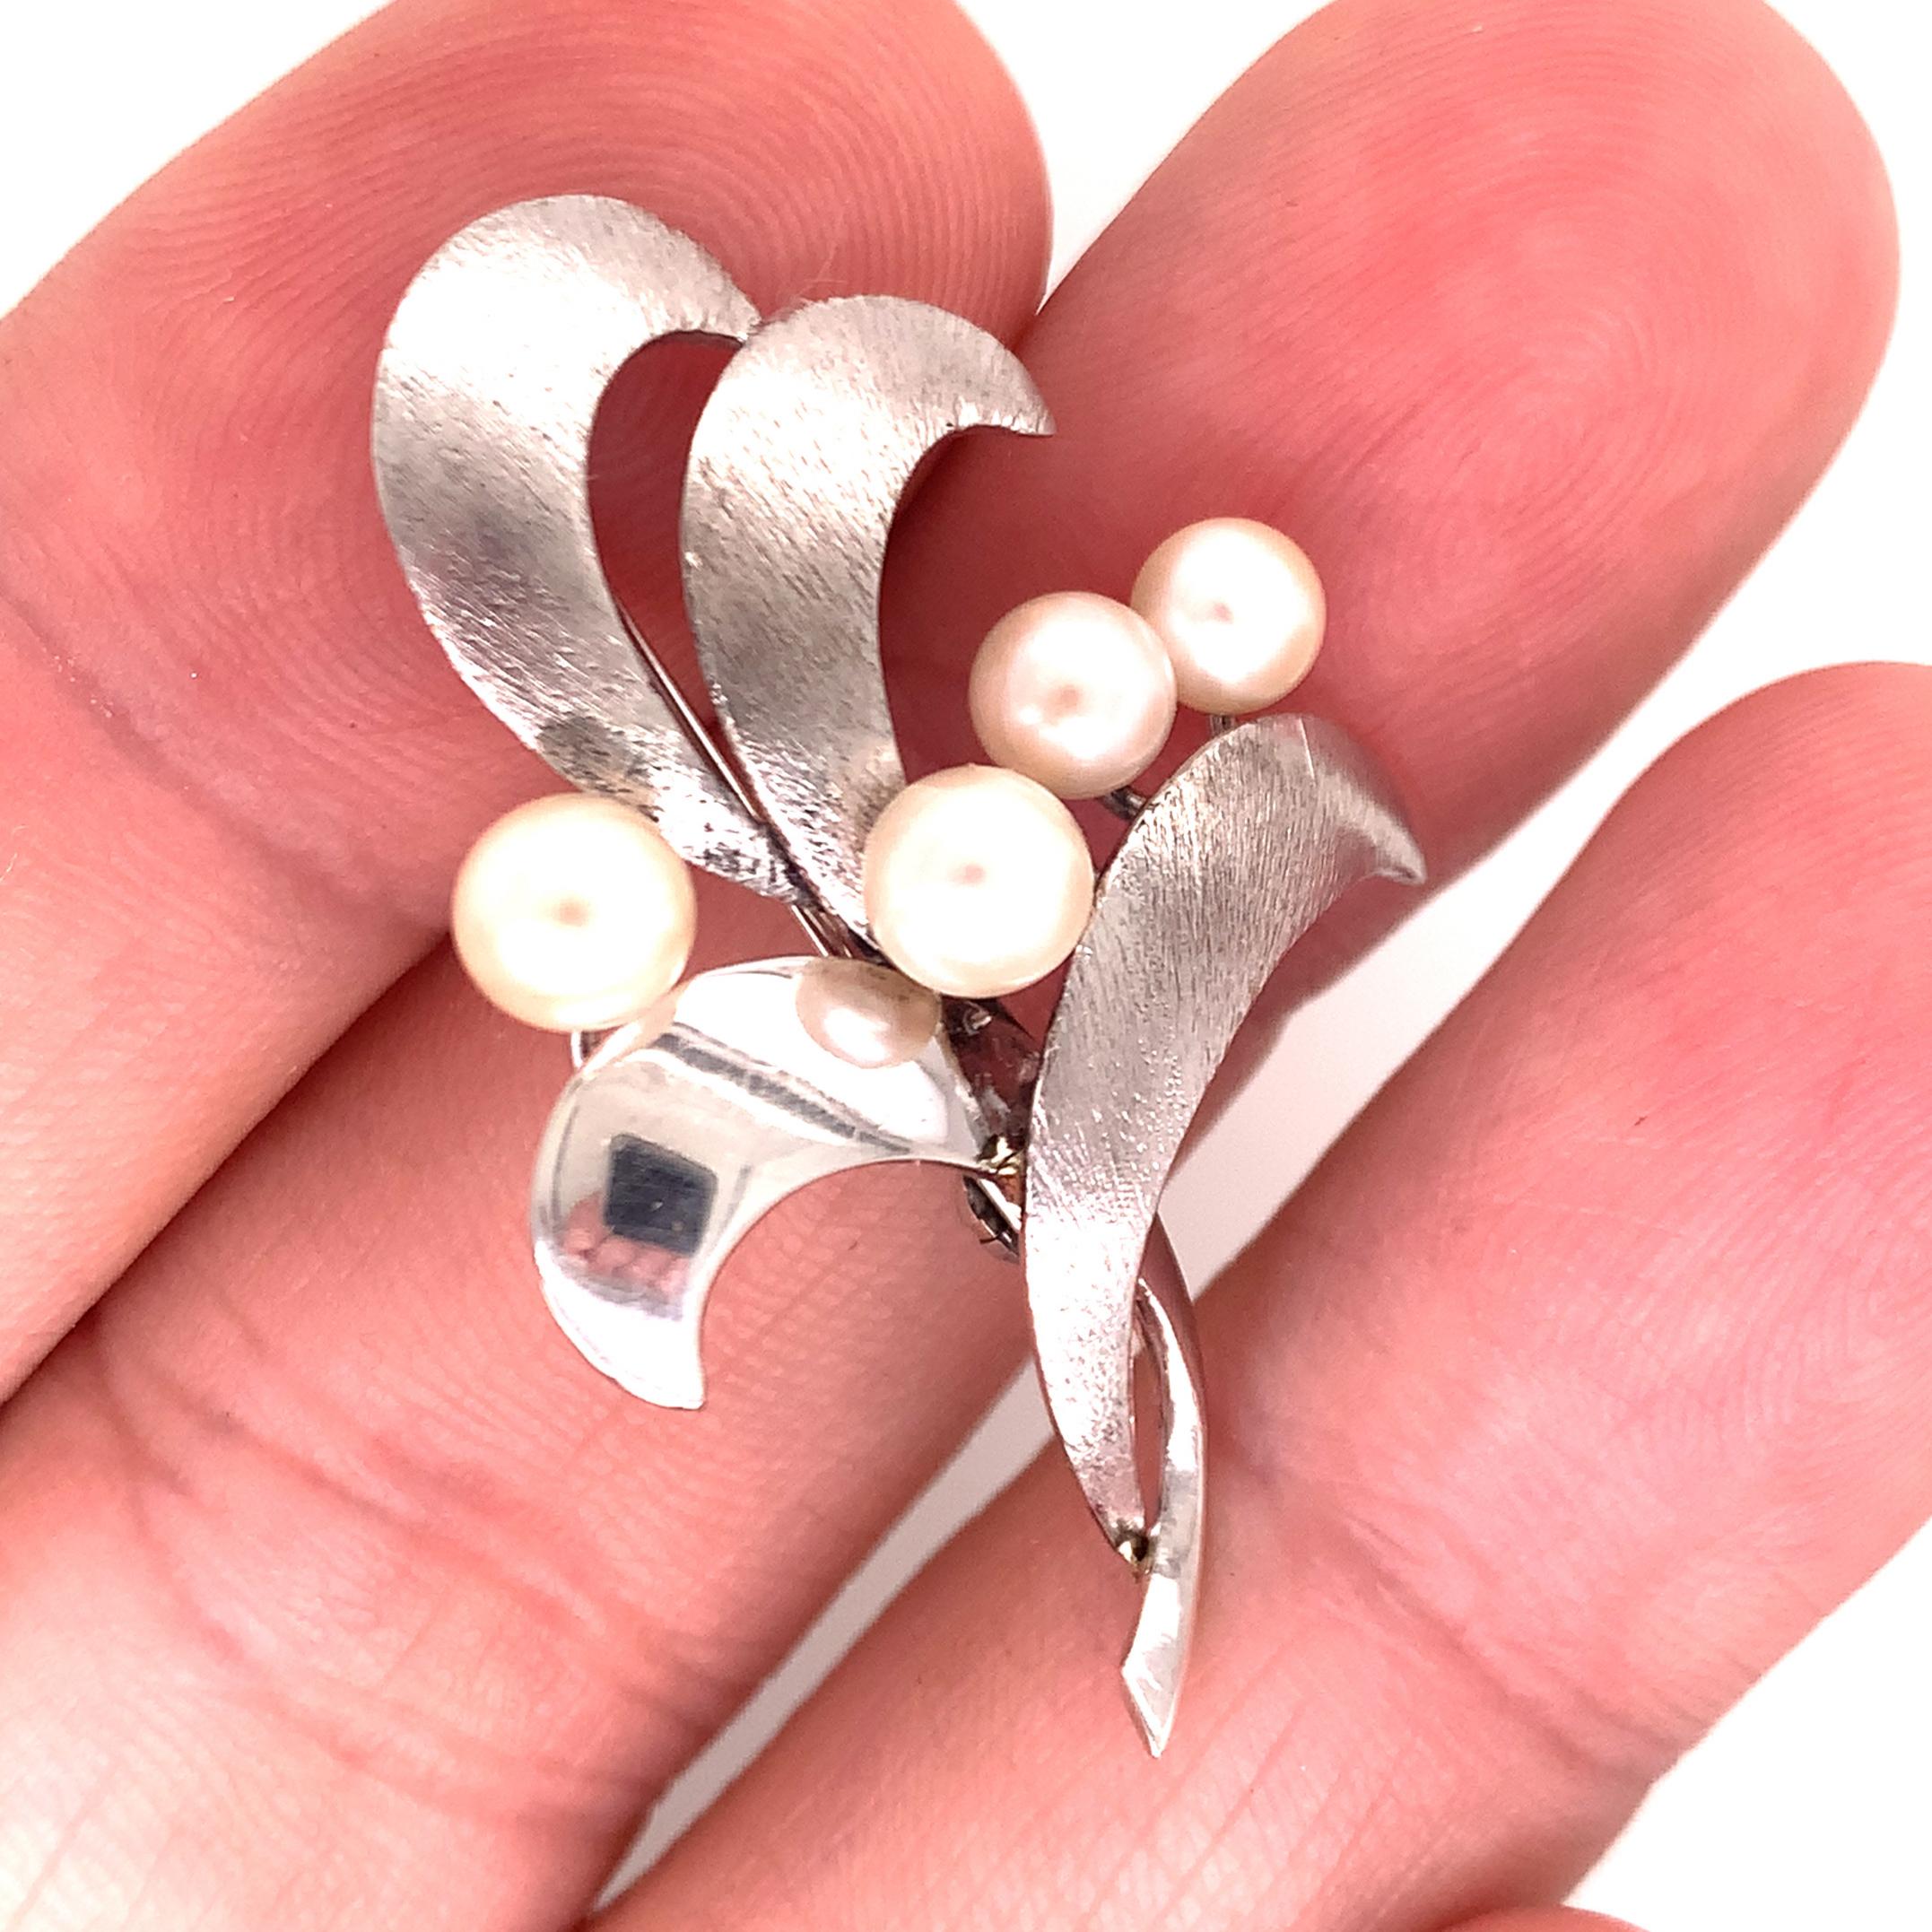 Mikimoto Estate Akoya Pearl Brooch Pin Sterling Silver 5.41 mm M167

This elegant Authentic Mikimoto Estate Akoya pearl brooch pin is made of sterling silver and has 4 Akoya Cultured Pearls ranging in size from 4.82 - 5.41 mm with a weight of 4.52